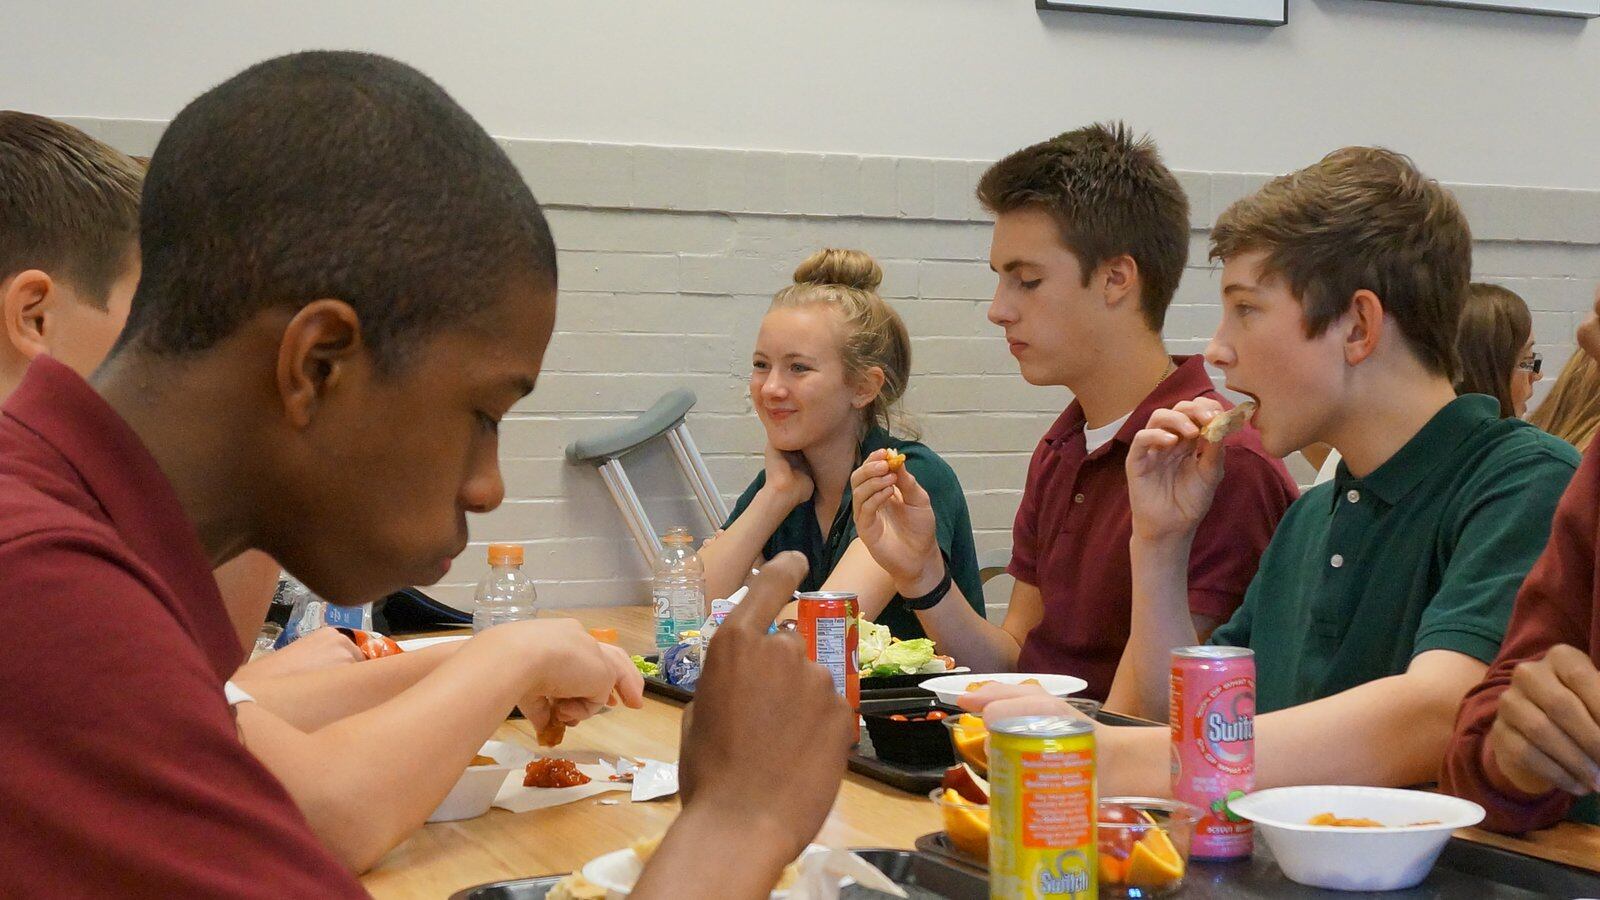 Students eat lunch at the Oaks Academy Middle School, a private Christian school in Indiana that is integrated by design and accepts taxpayer funded vouchers.